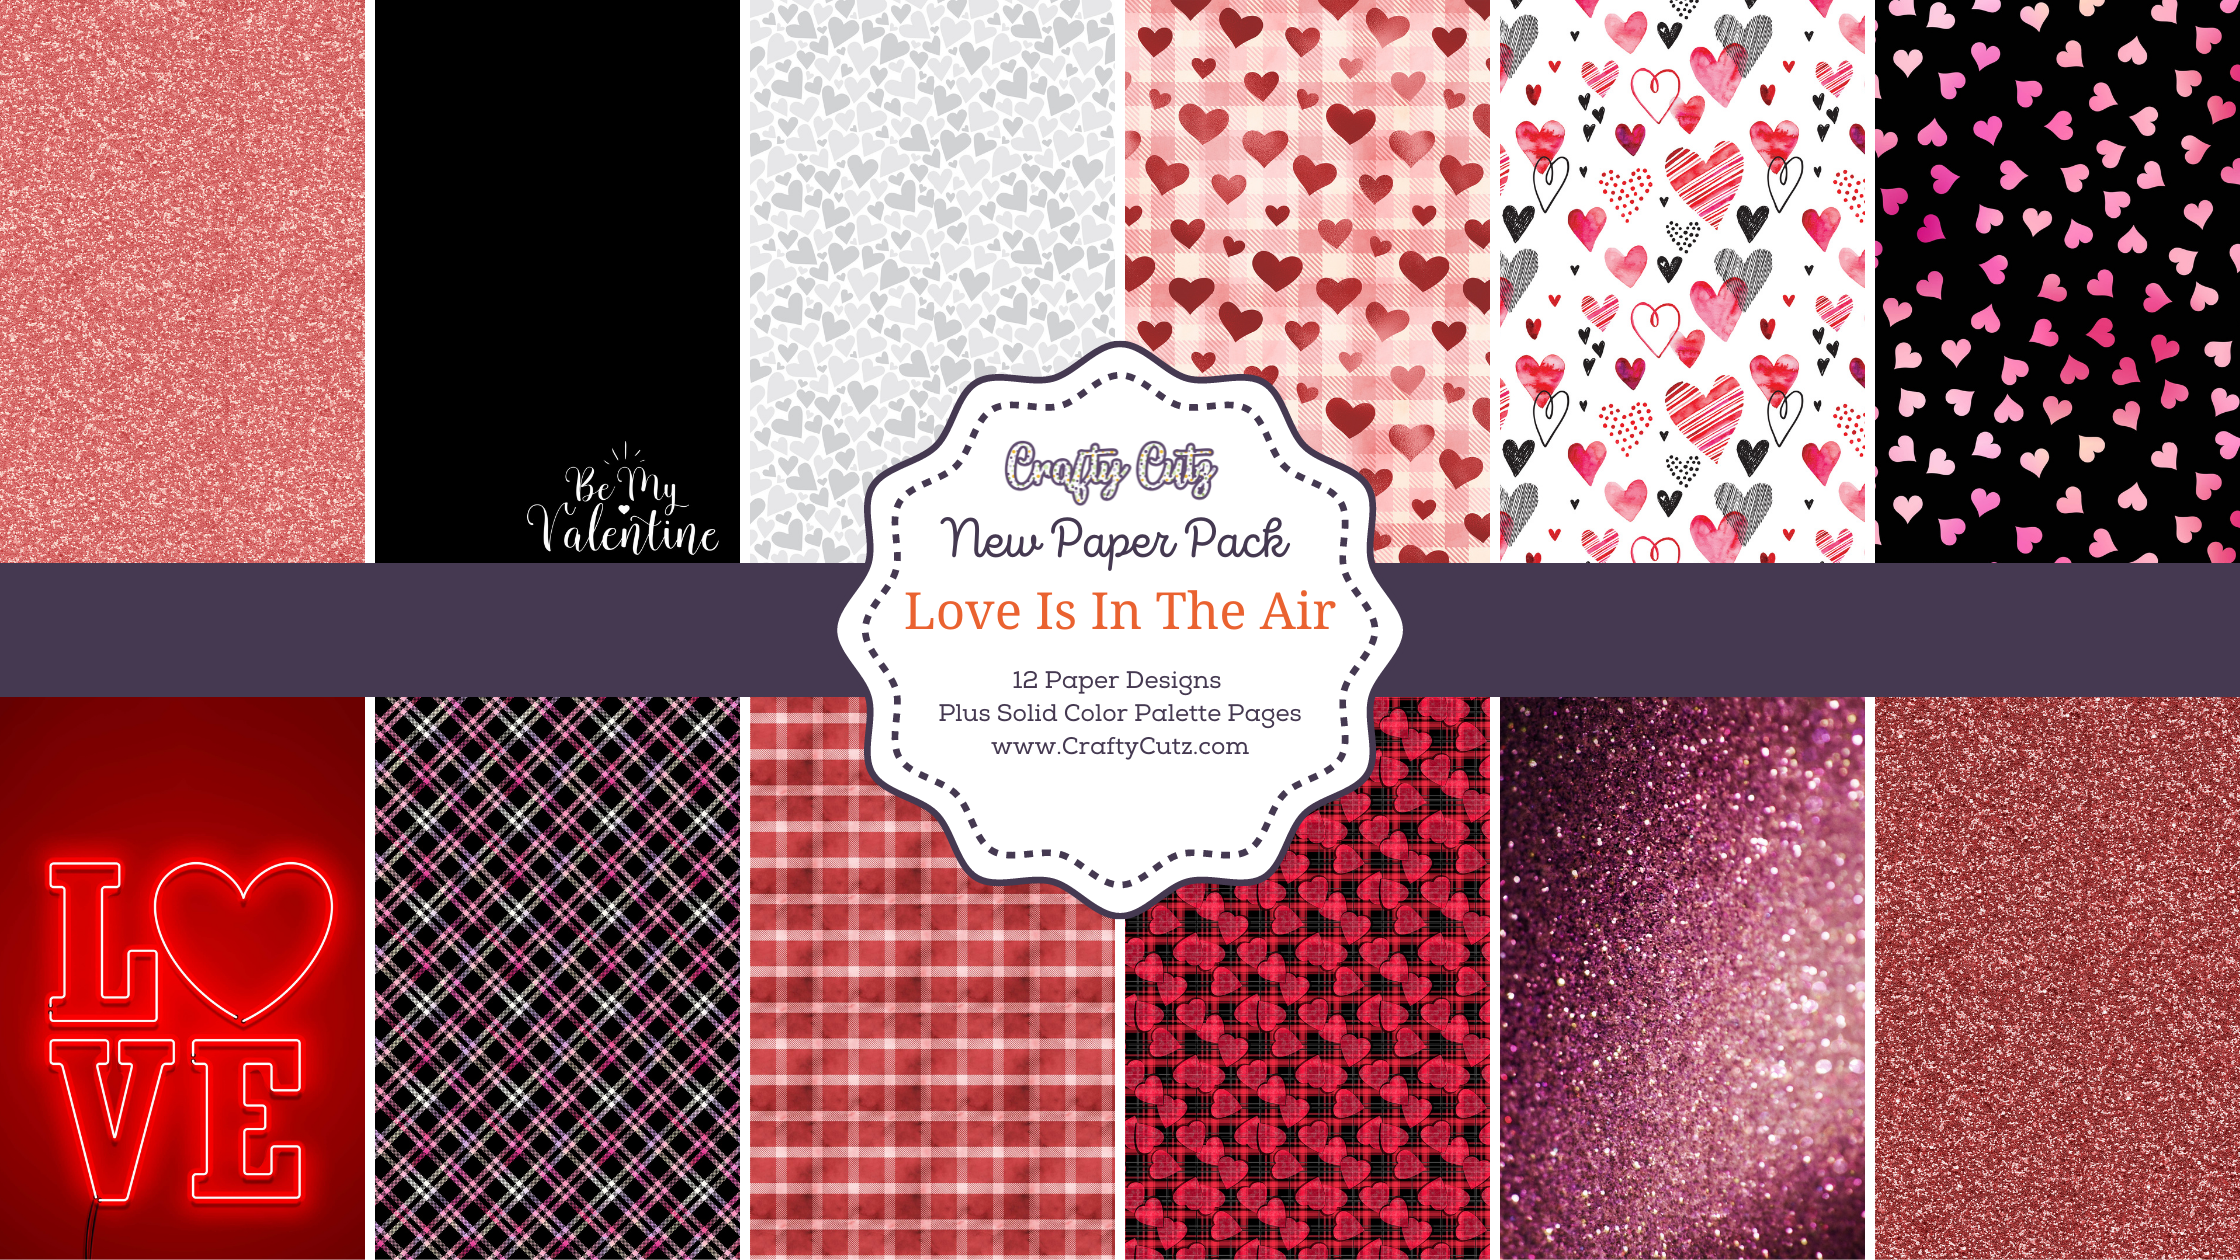 Love Is In The Air Free Paper Pack Sample Download